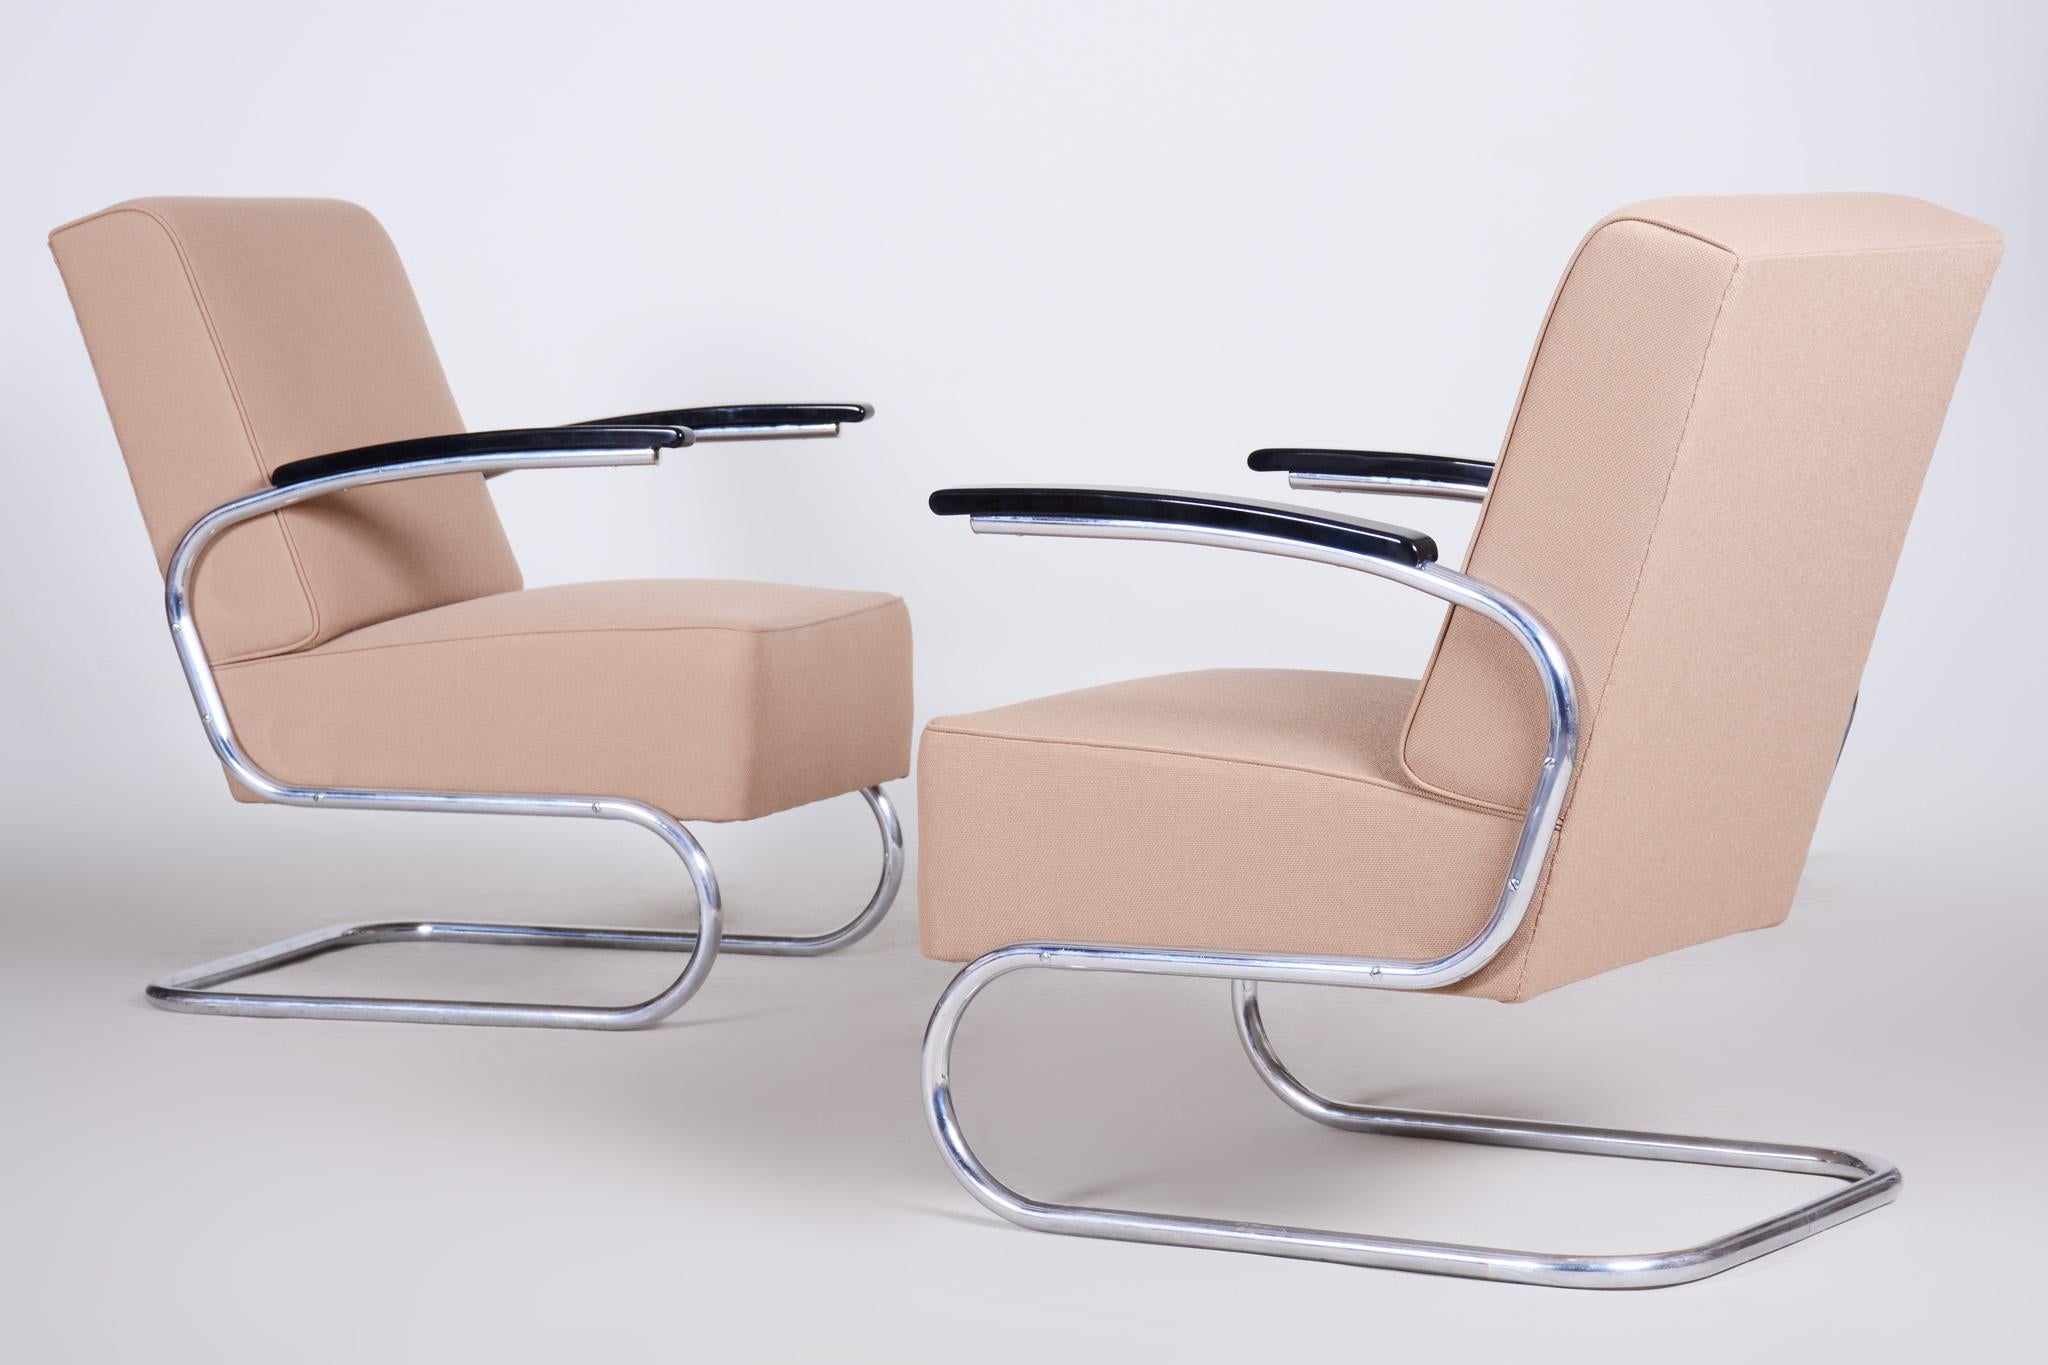 Chrome Bauhaus Armchairs Designed by Mücke Melder, Fully Refurbished, 1930s For Sale 5